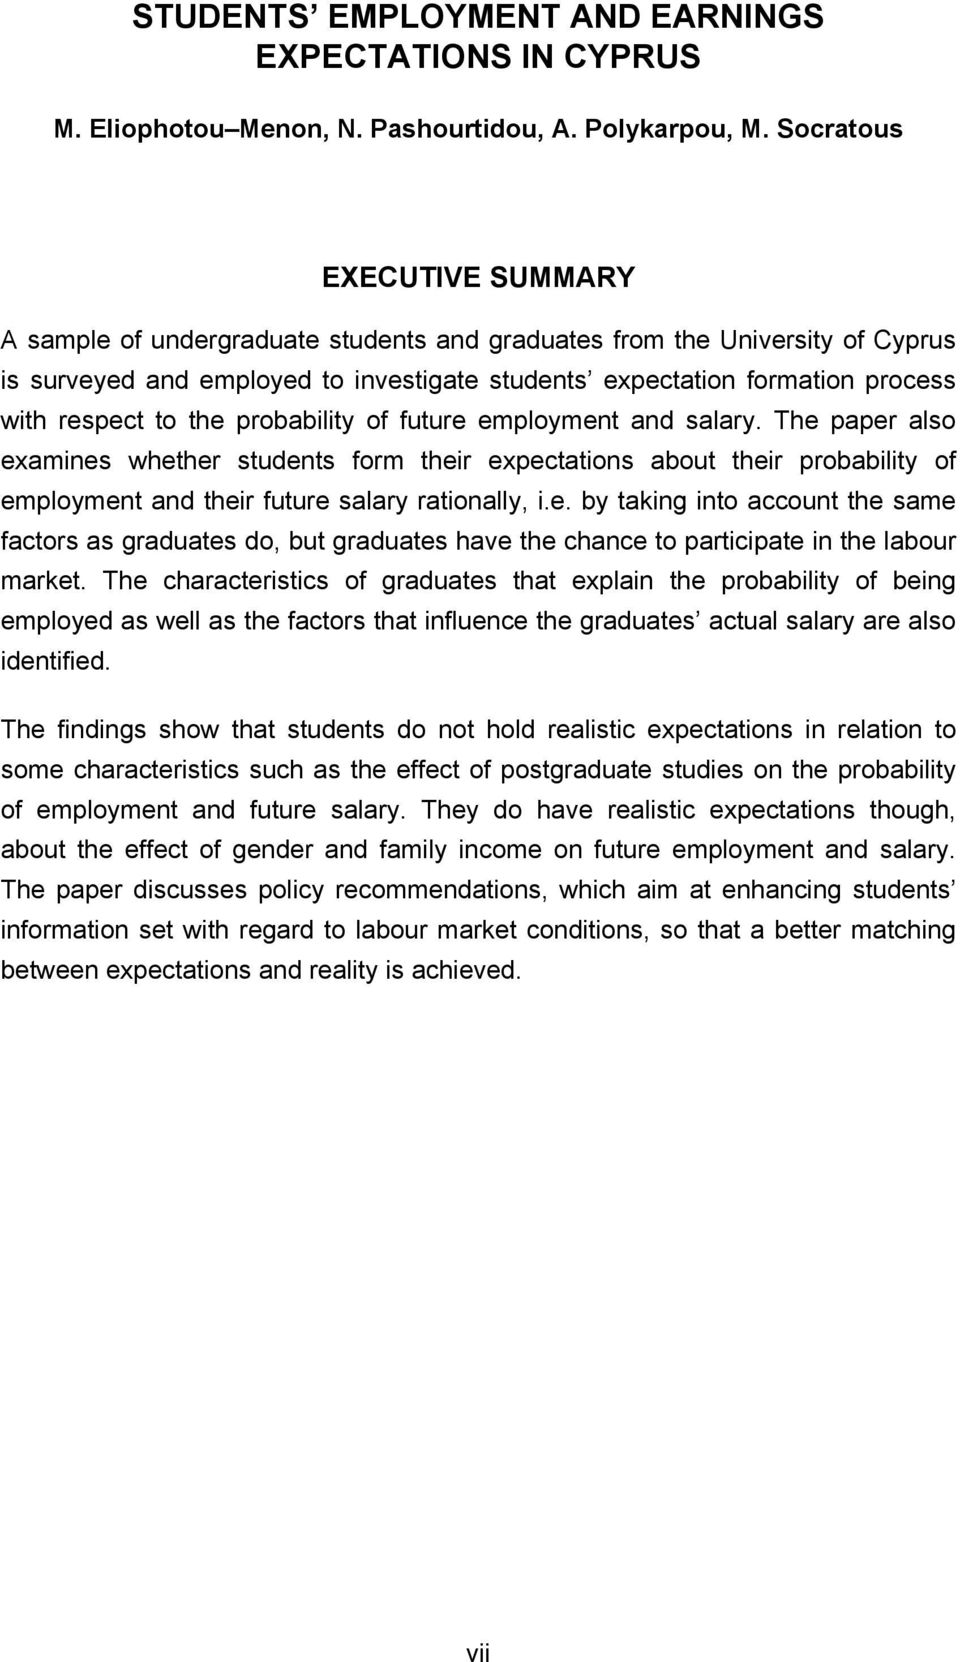 probablty of future employment and salary. The paper also examnes whether students form ther expectatons about ther probablty of employment and ther future salary ratonally,.e. by takng nto account the same factors as graduates do, but graduates have the chance to partcpate n the labour market.